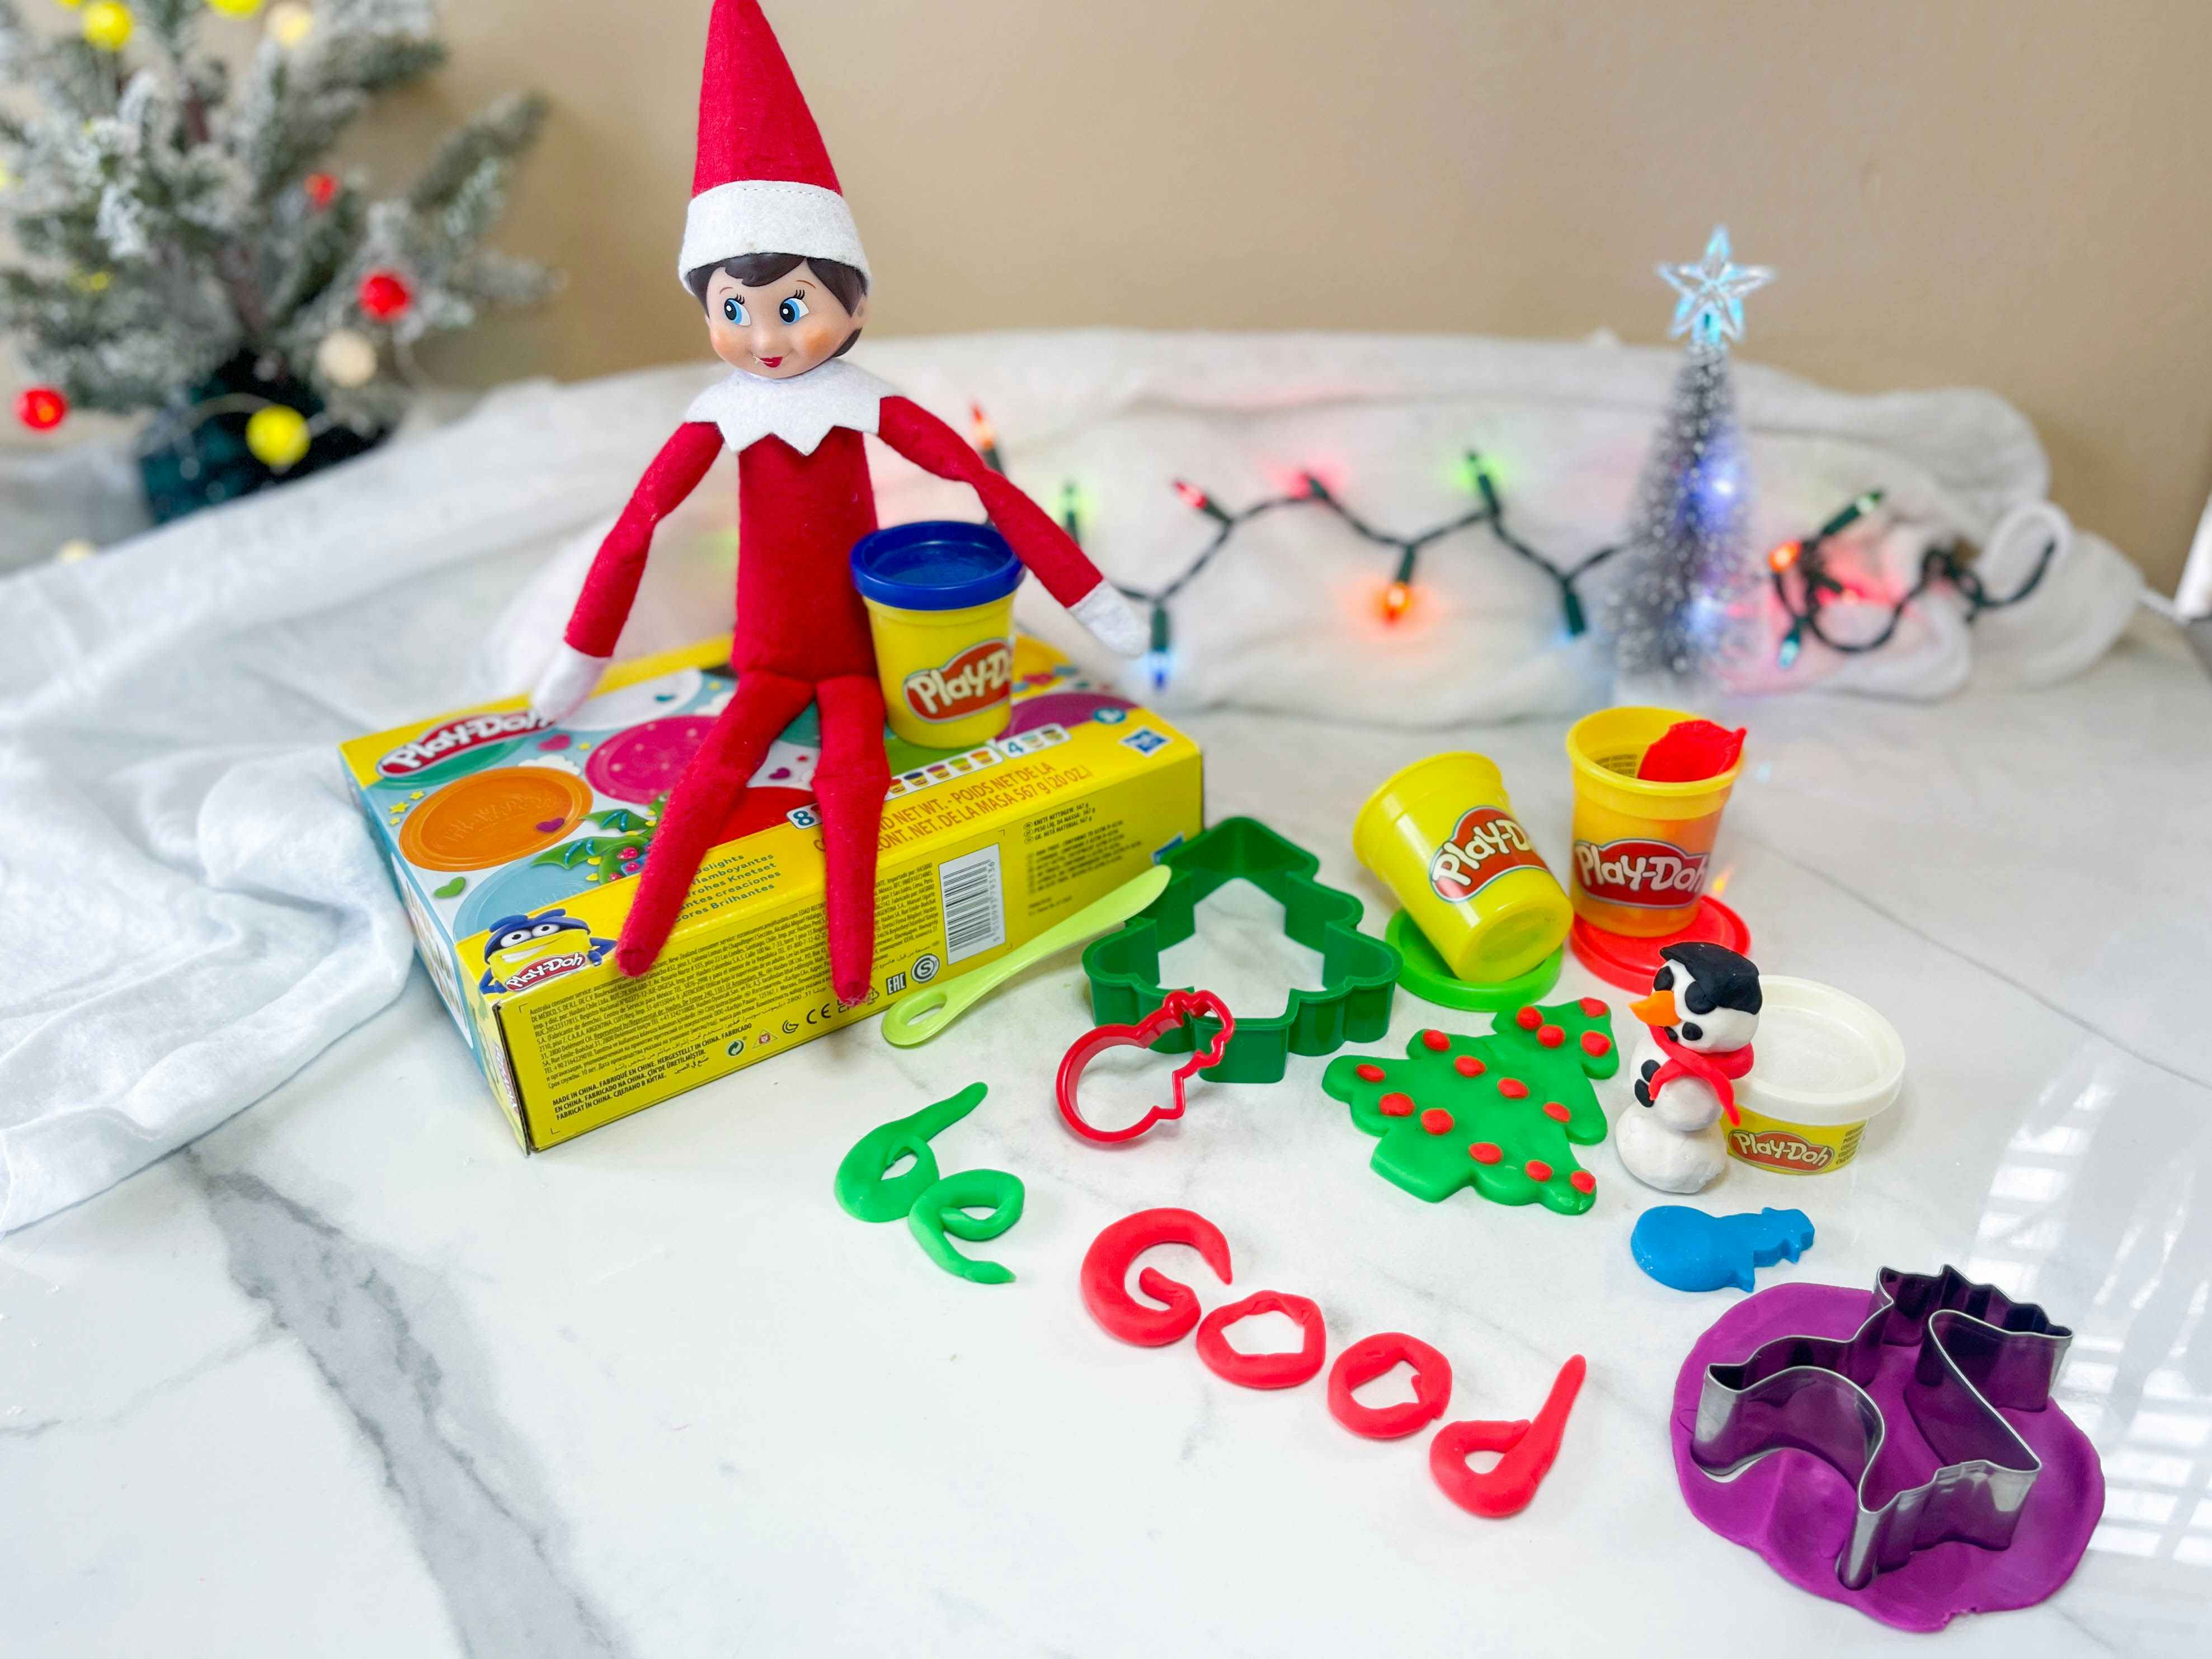 elf on the shelf doll sitting on top a playdoh box next to playdoh spelling out be good and other holiday playdoh supplies